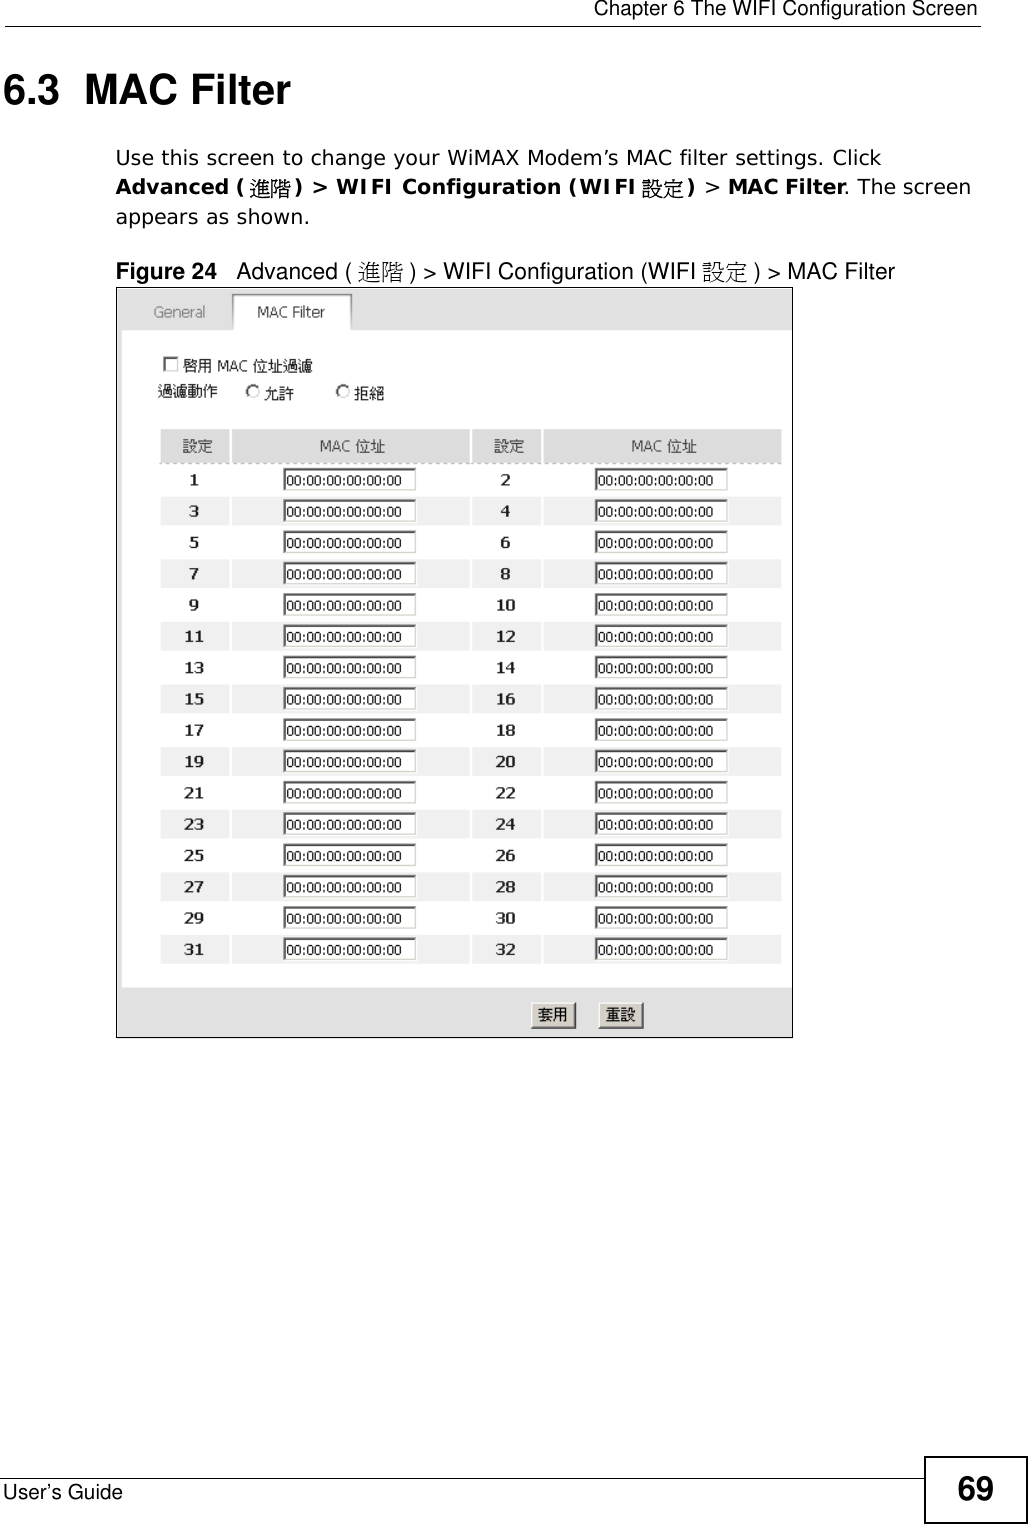  Chapter 6 The WIFI Configuration ScreenUser’s Guide 696.3  MAC Filter     Use this screen to change your WiMAX Modem’s MAC filter settings. Click Advanced (進階) &gt; WIFI Configuration (WIFI設定) &gt; MAC Filter. The screen appears as shown.Figure 24   Advanced ( 進階 ) &gt; WIFI Configuration (WIFI 設定 ) &gt; MAC Filter